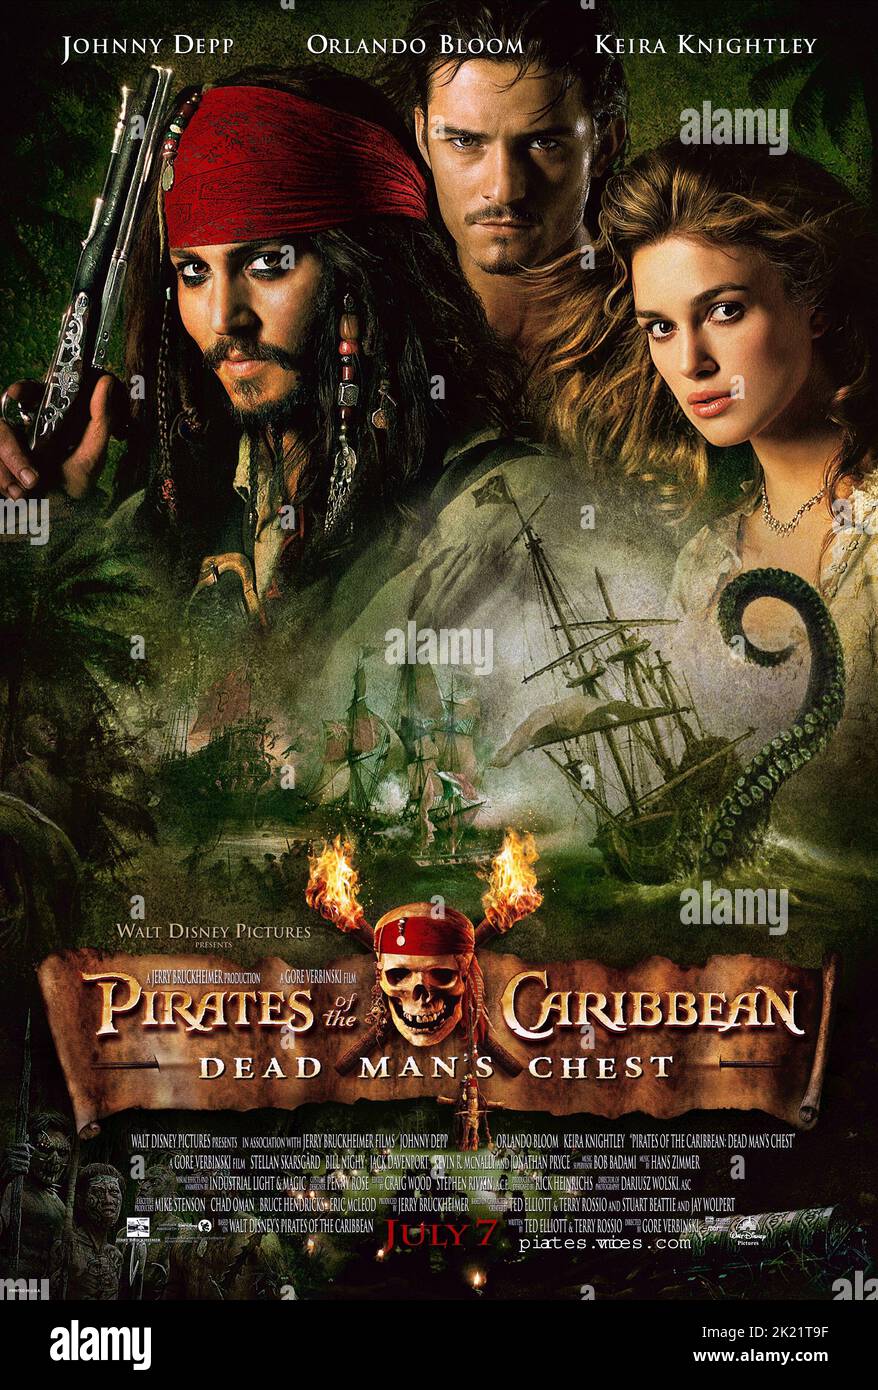 JOHNNY DEPP, ORLANDO BLOOM, KEIRA KNIGHTLEY POSTER, PIRATES OF THE CARIBBEAN: DEAD MAN'S CHEST, 2006 Stock Photo